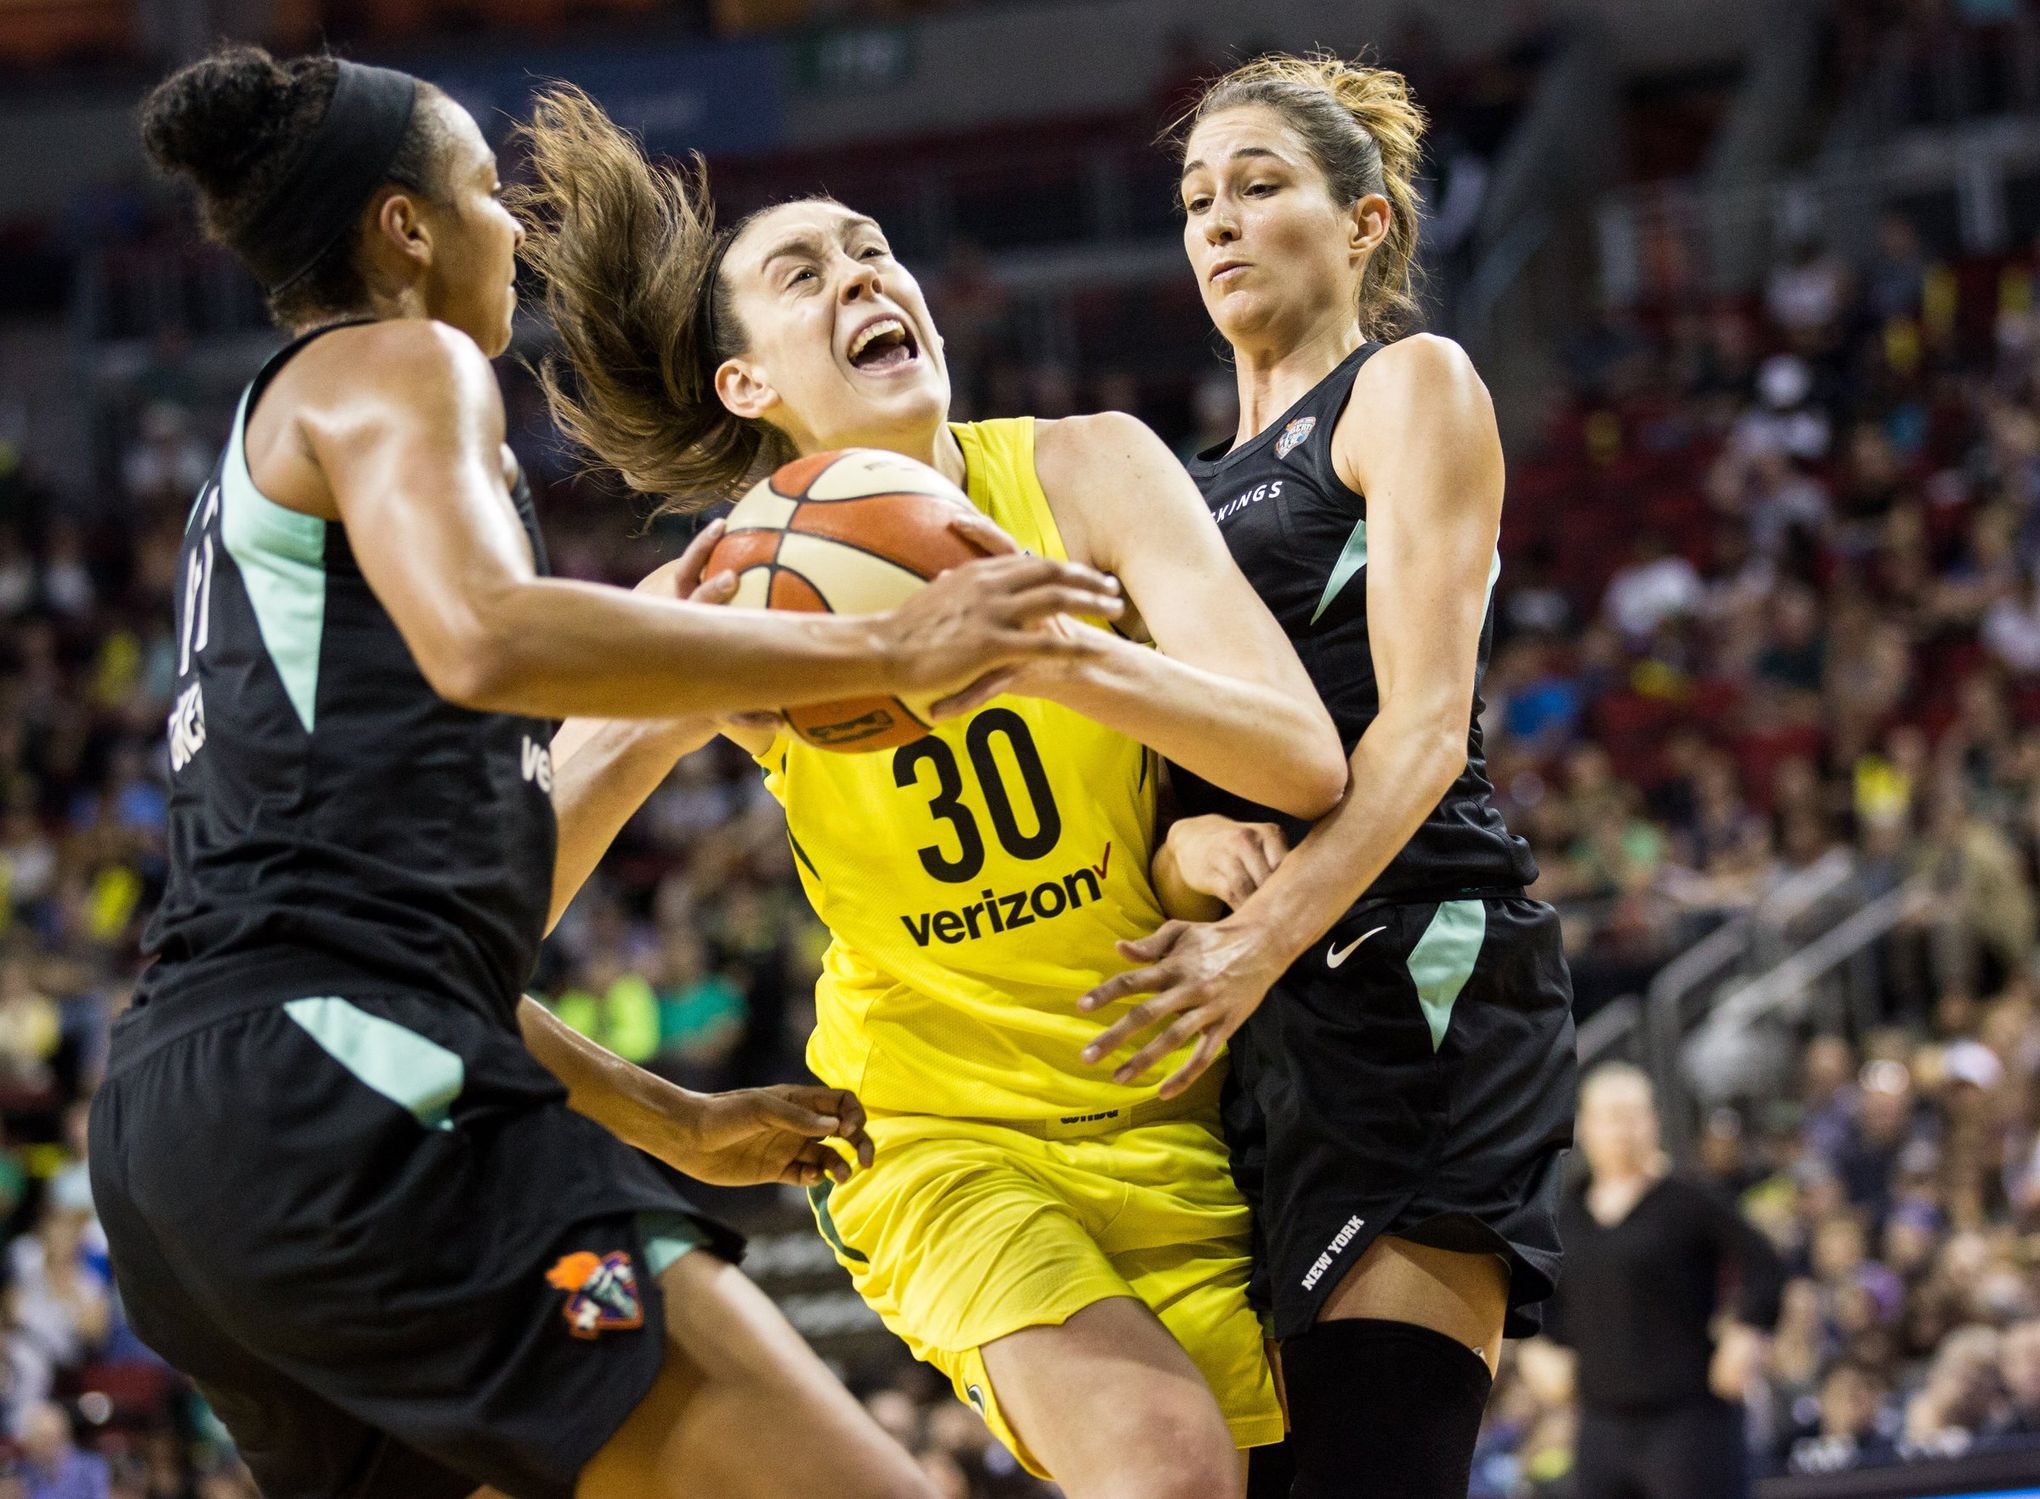 How the Liberty could clinch the No. 1 seed in the WNBA playoffs